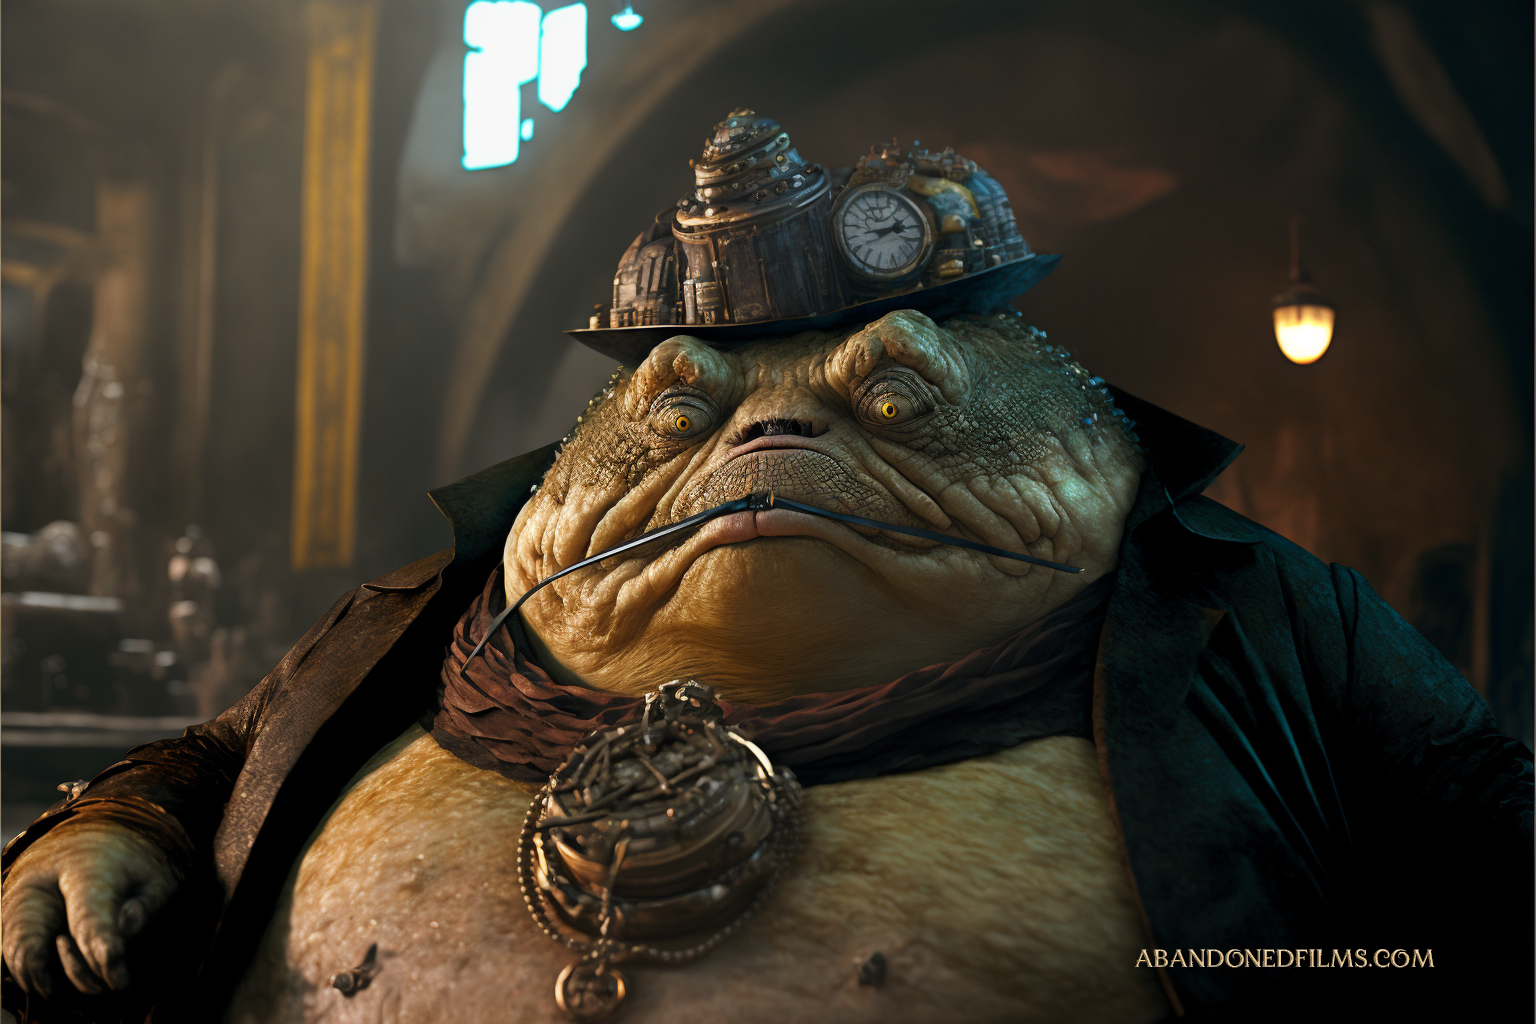 Neural network depicts planets and iconic Star Wars characters in steampunk style-6